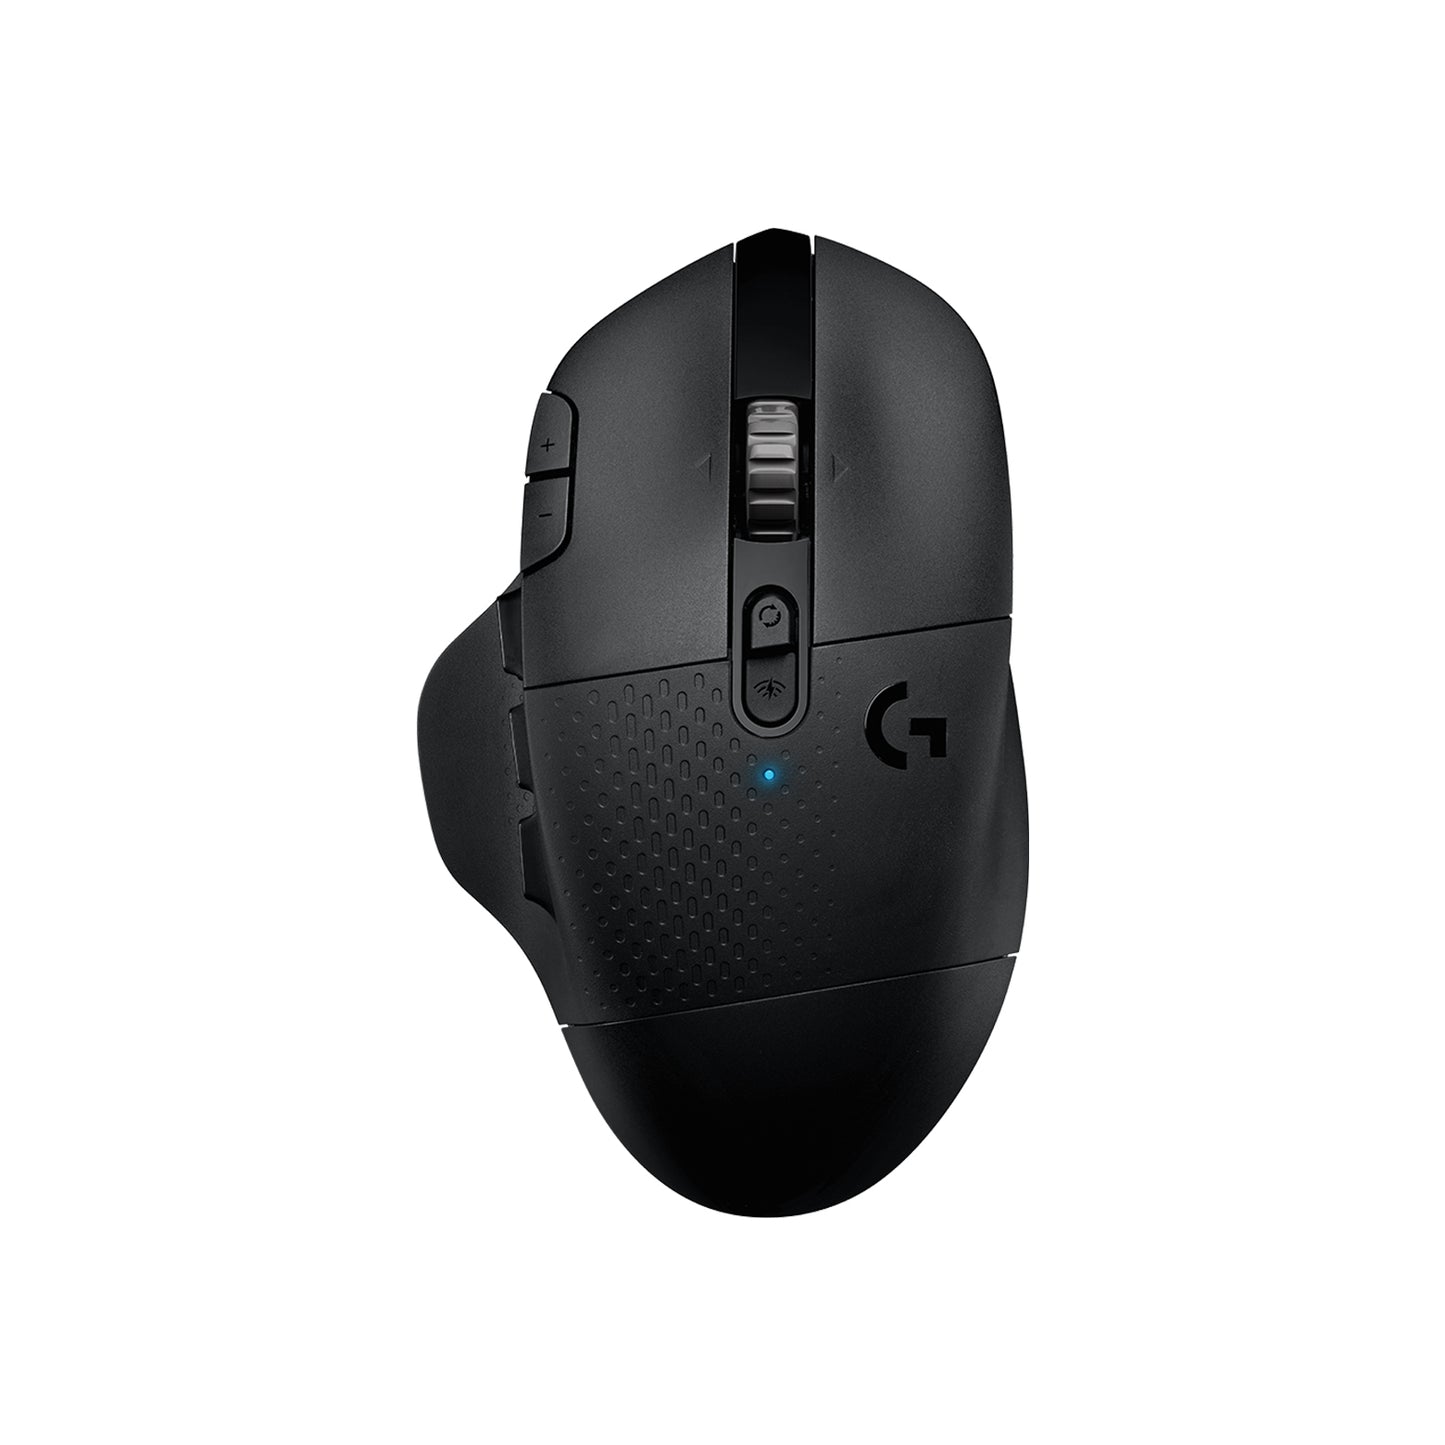 Logitech G604 LIGHTSPEED Wireless Gaming Mouse with Dual Connectivity Bluetooth, Hero 25K DPI Sensor DPI, 240 Hour Battery, 15 Programmable Controls